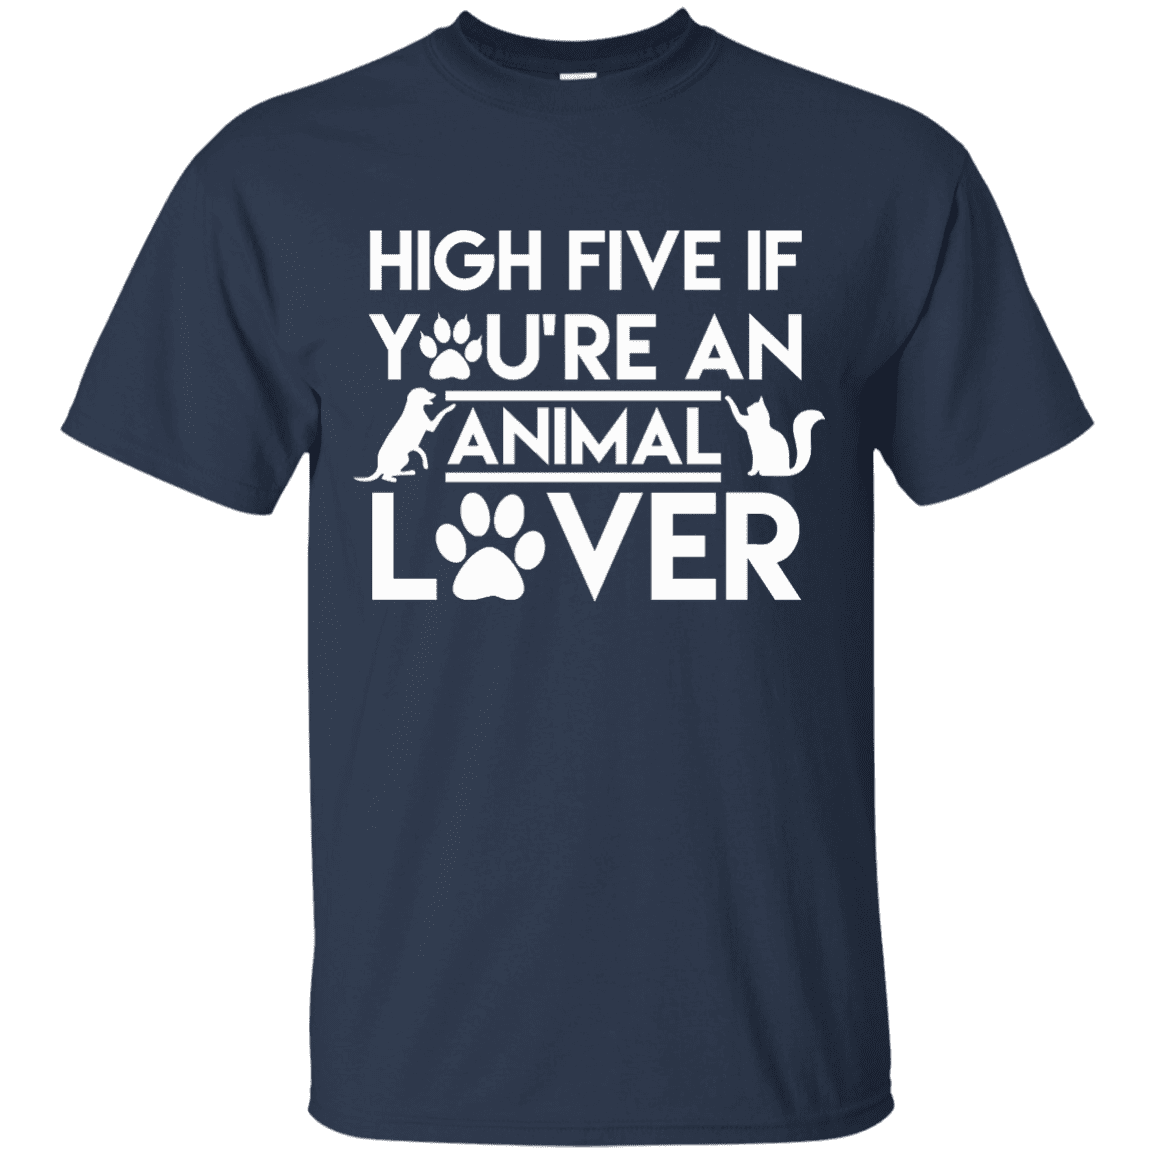 High Five If You're An Animal Lover - T Shirt.